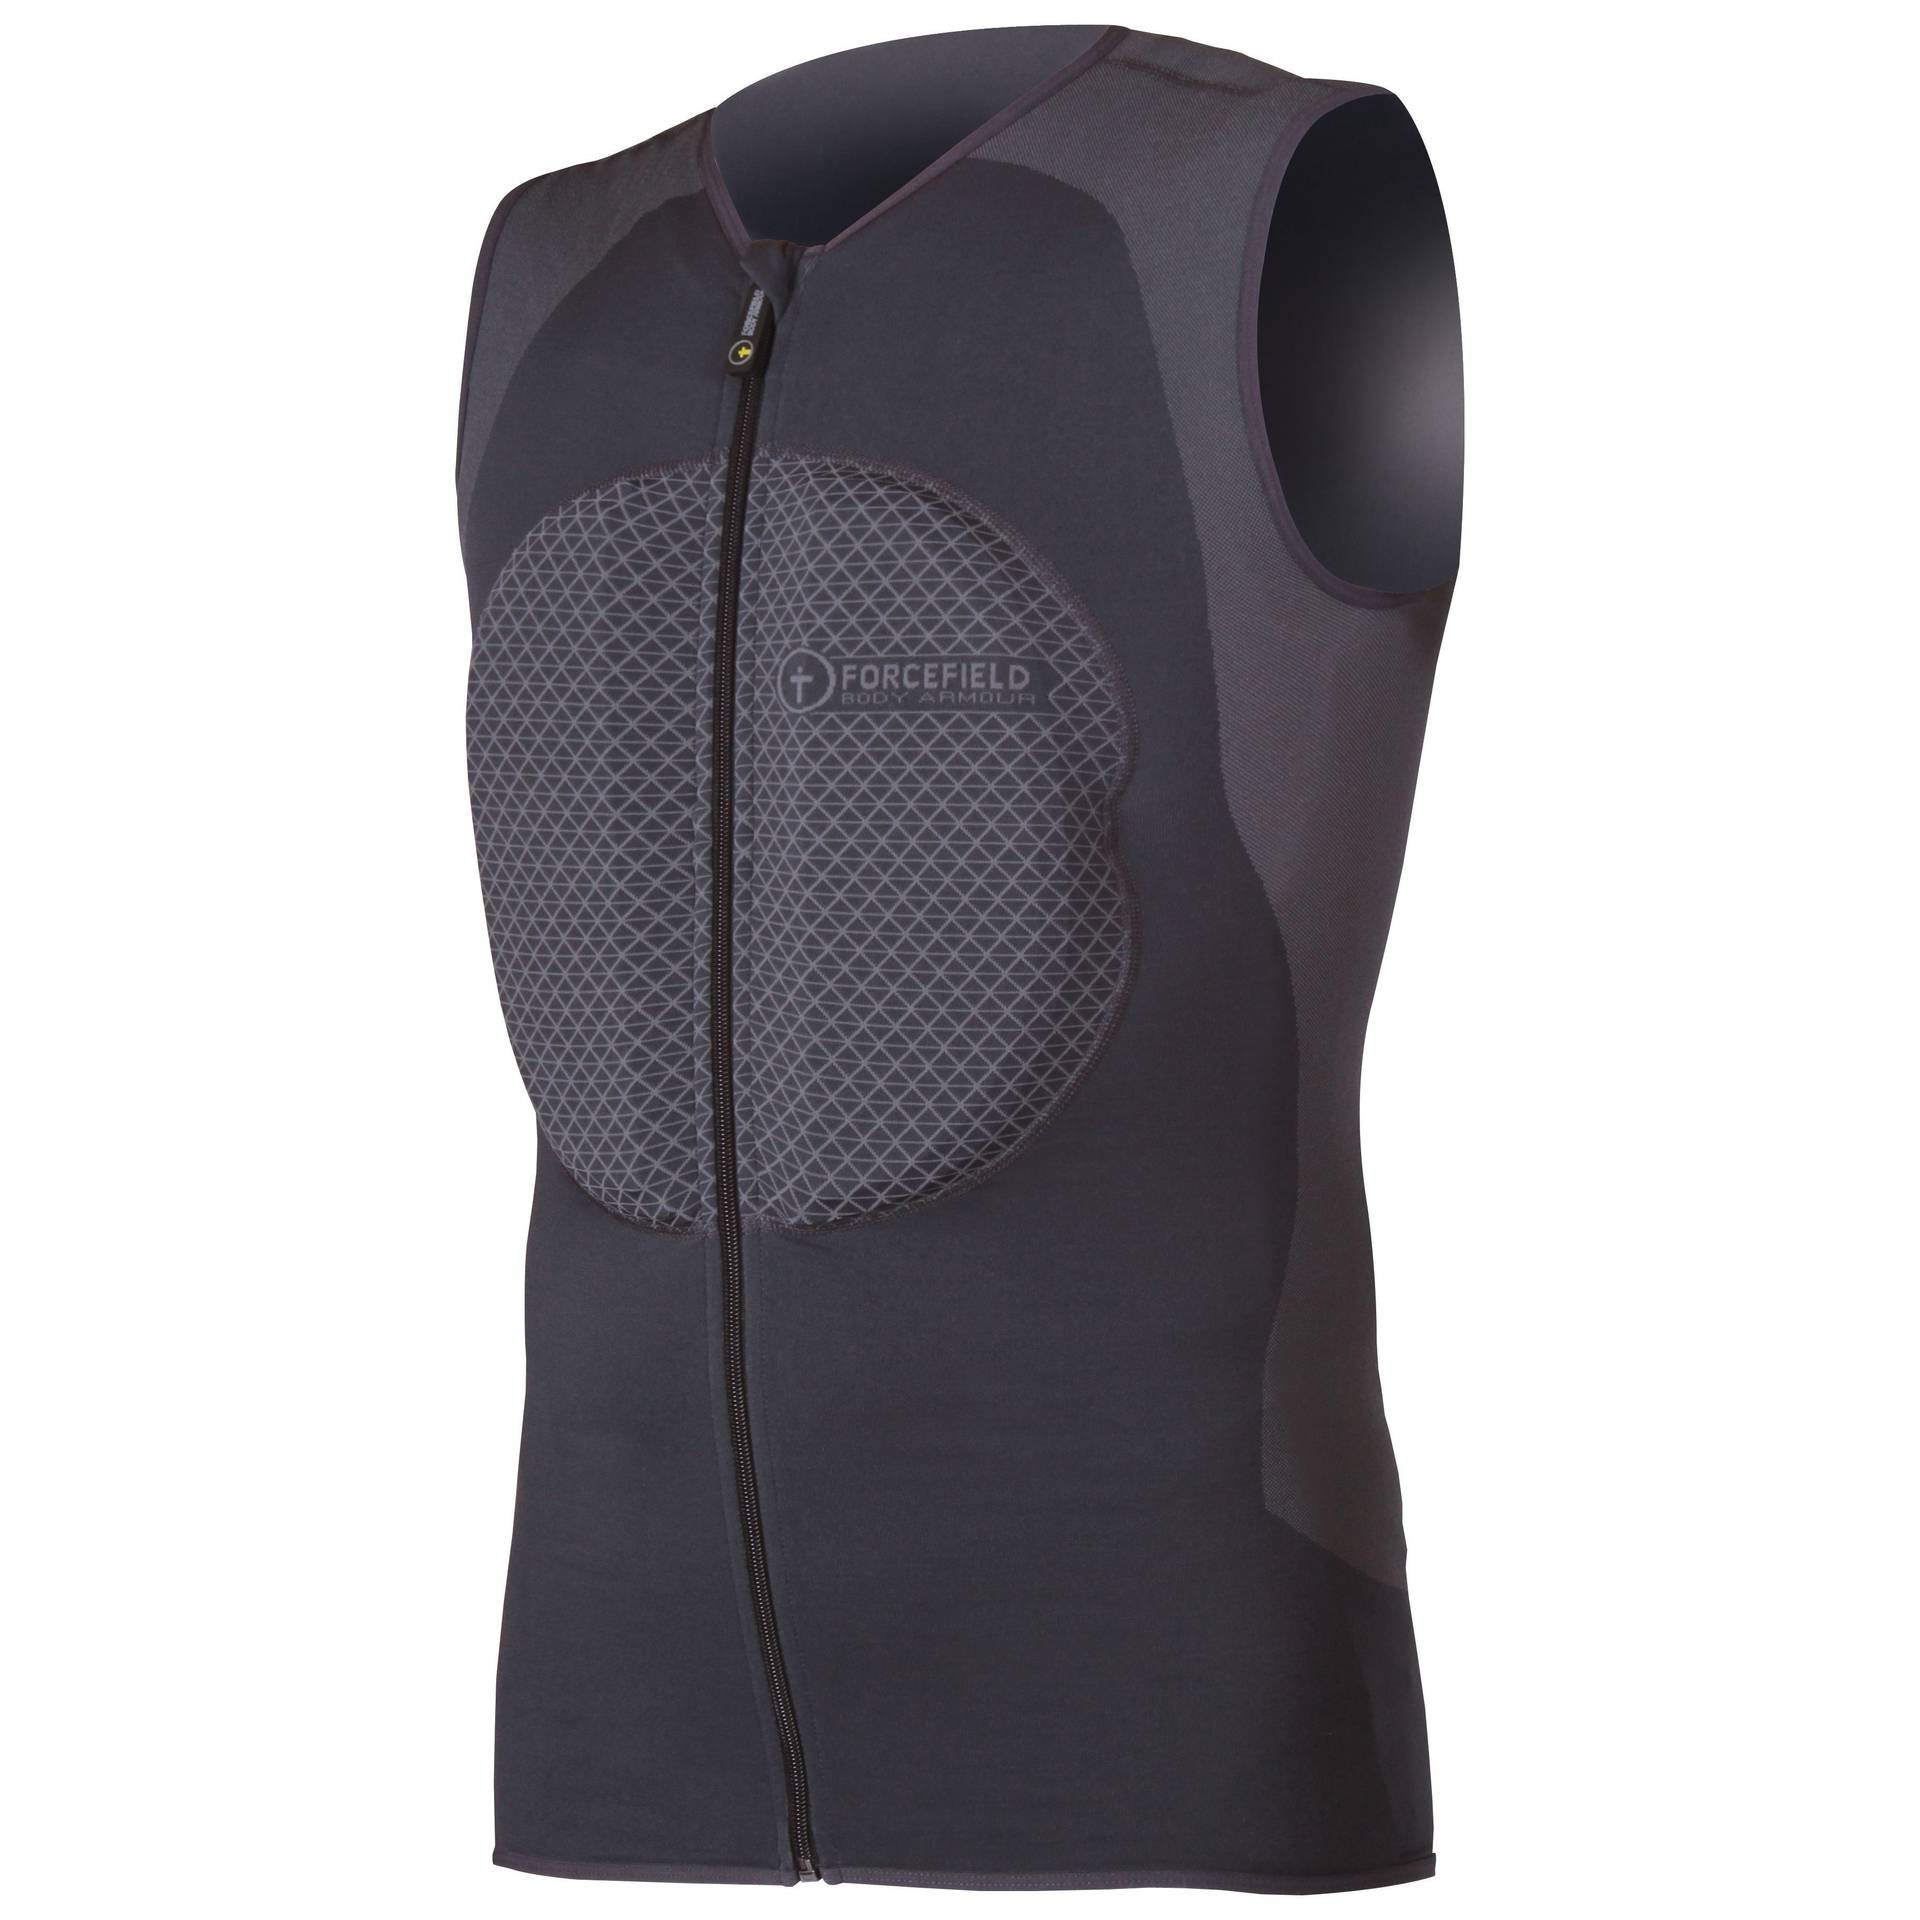 Forcefield Pro X-V Vest - Armored Tops - Protection - Motorcycle ...